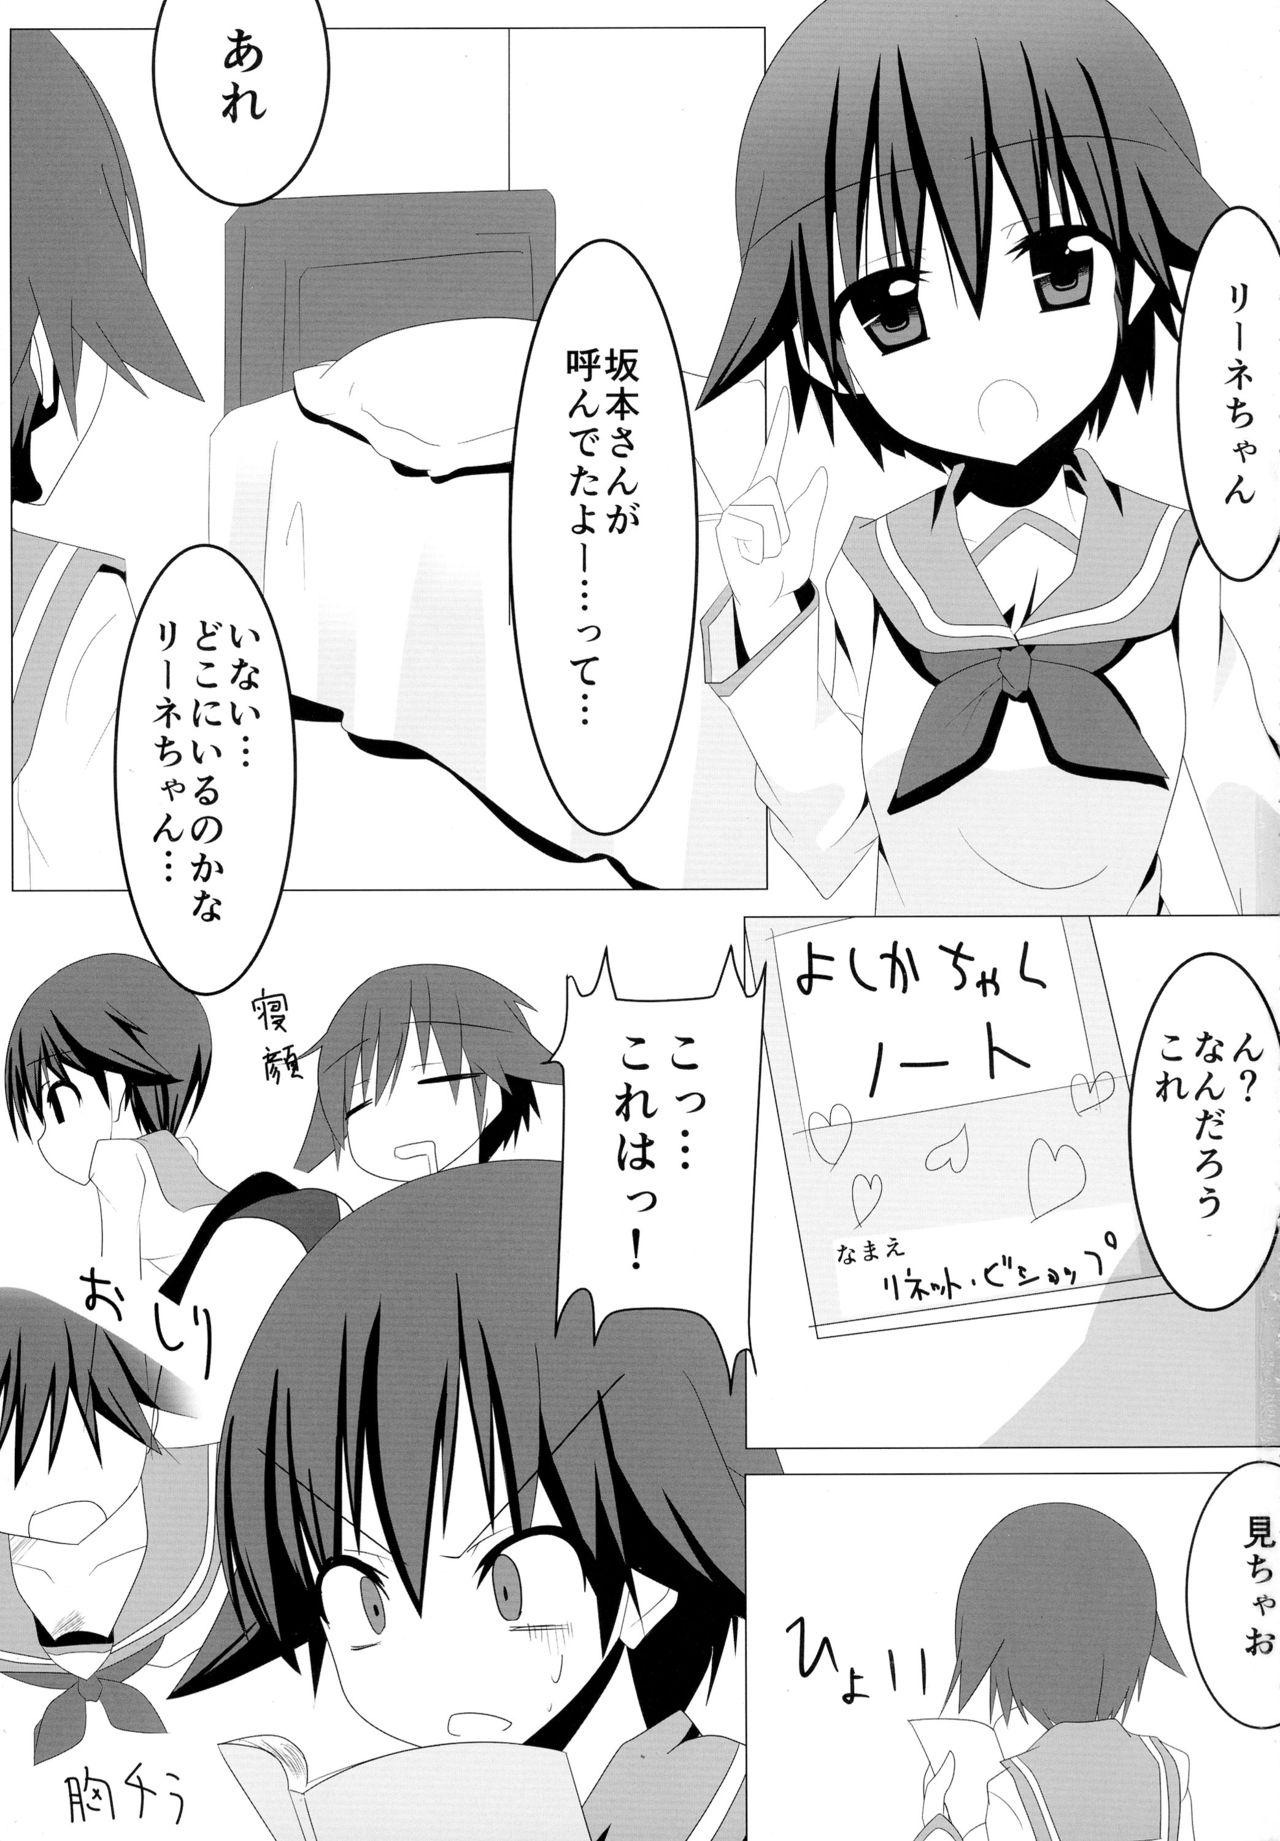 Submissive Witchincraft - Strike witches Awesome - Page 3